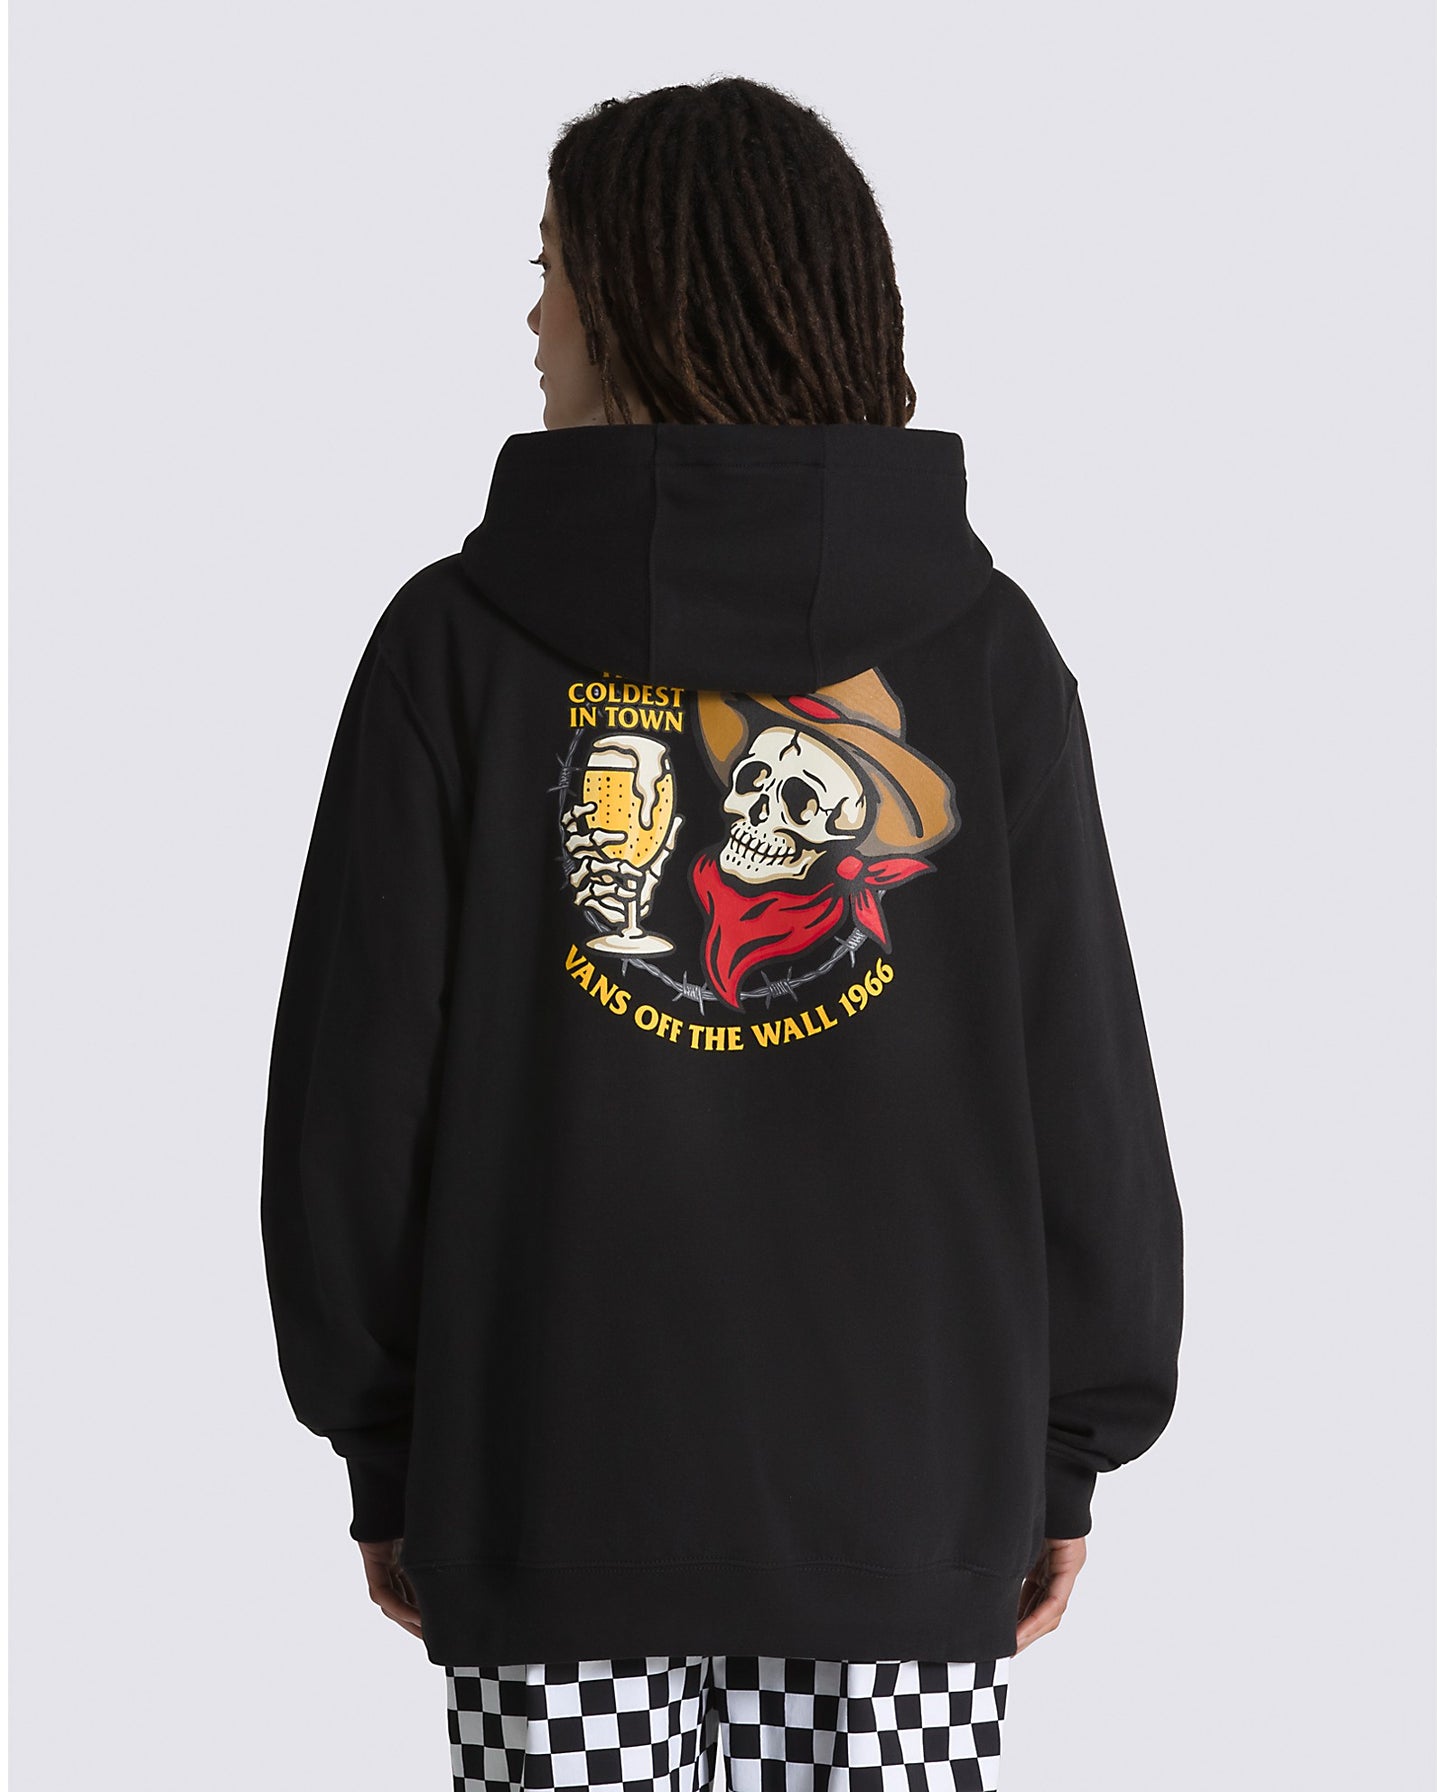 Coolest In Town Pullover Hoodie Blk(size options listed)